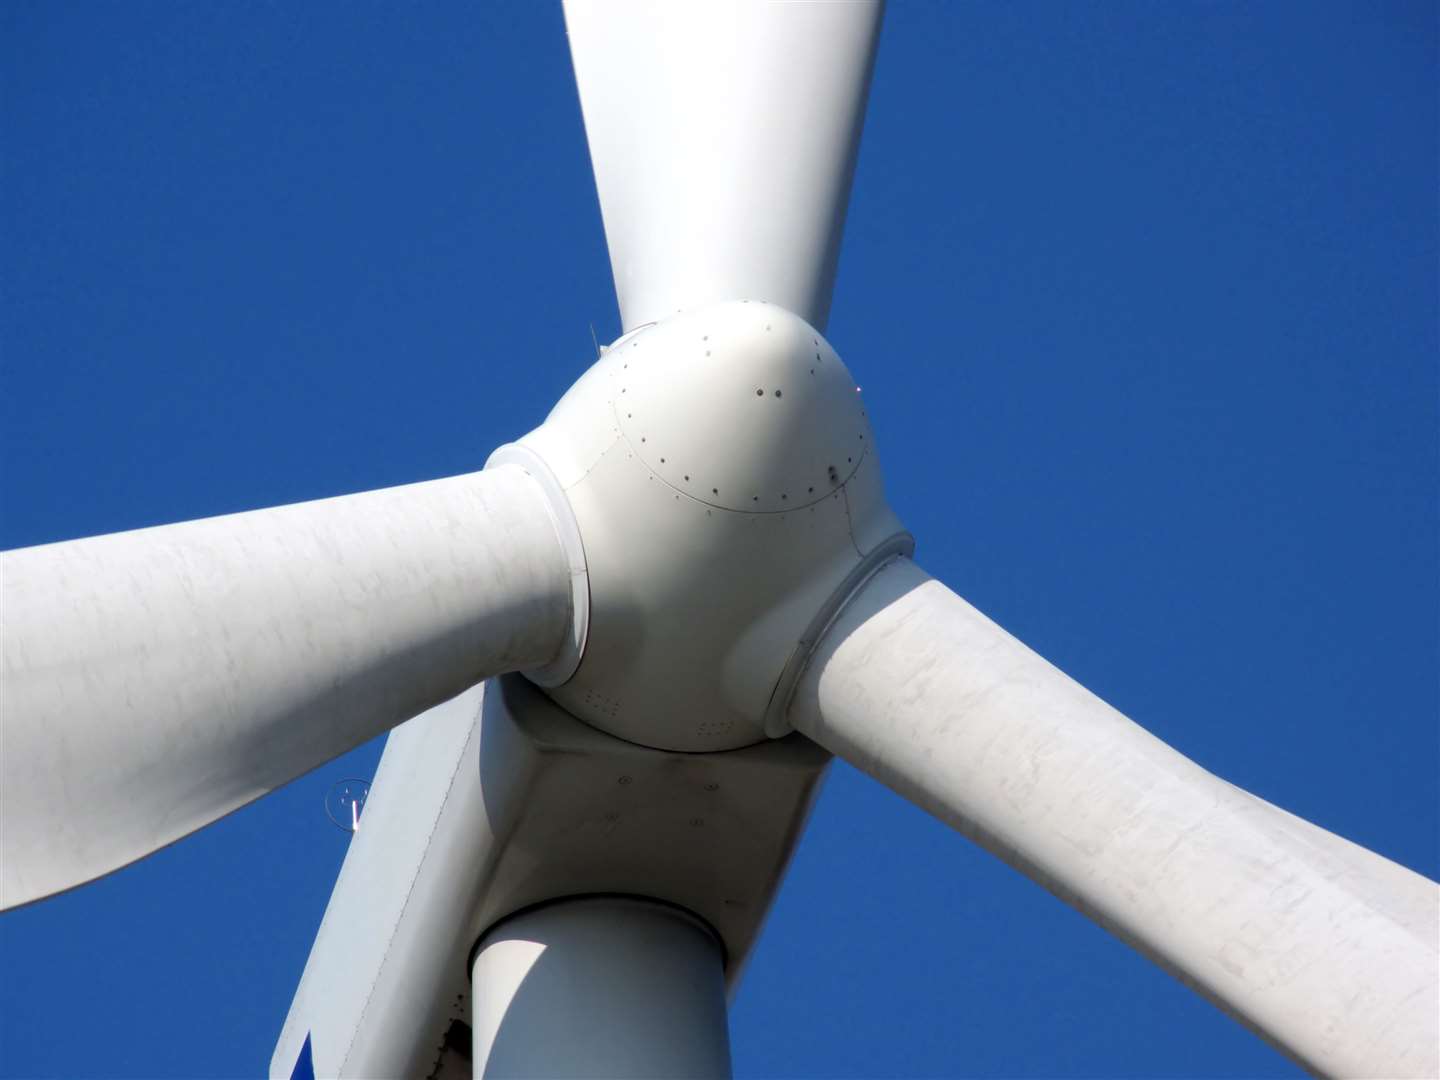 Developer Energiekontor UK Ltd is proposing to build 11 turbines of up to 200m in height in Strath Oykel forest.